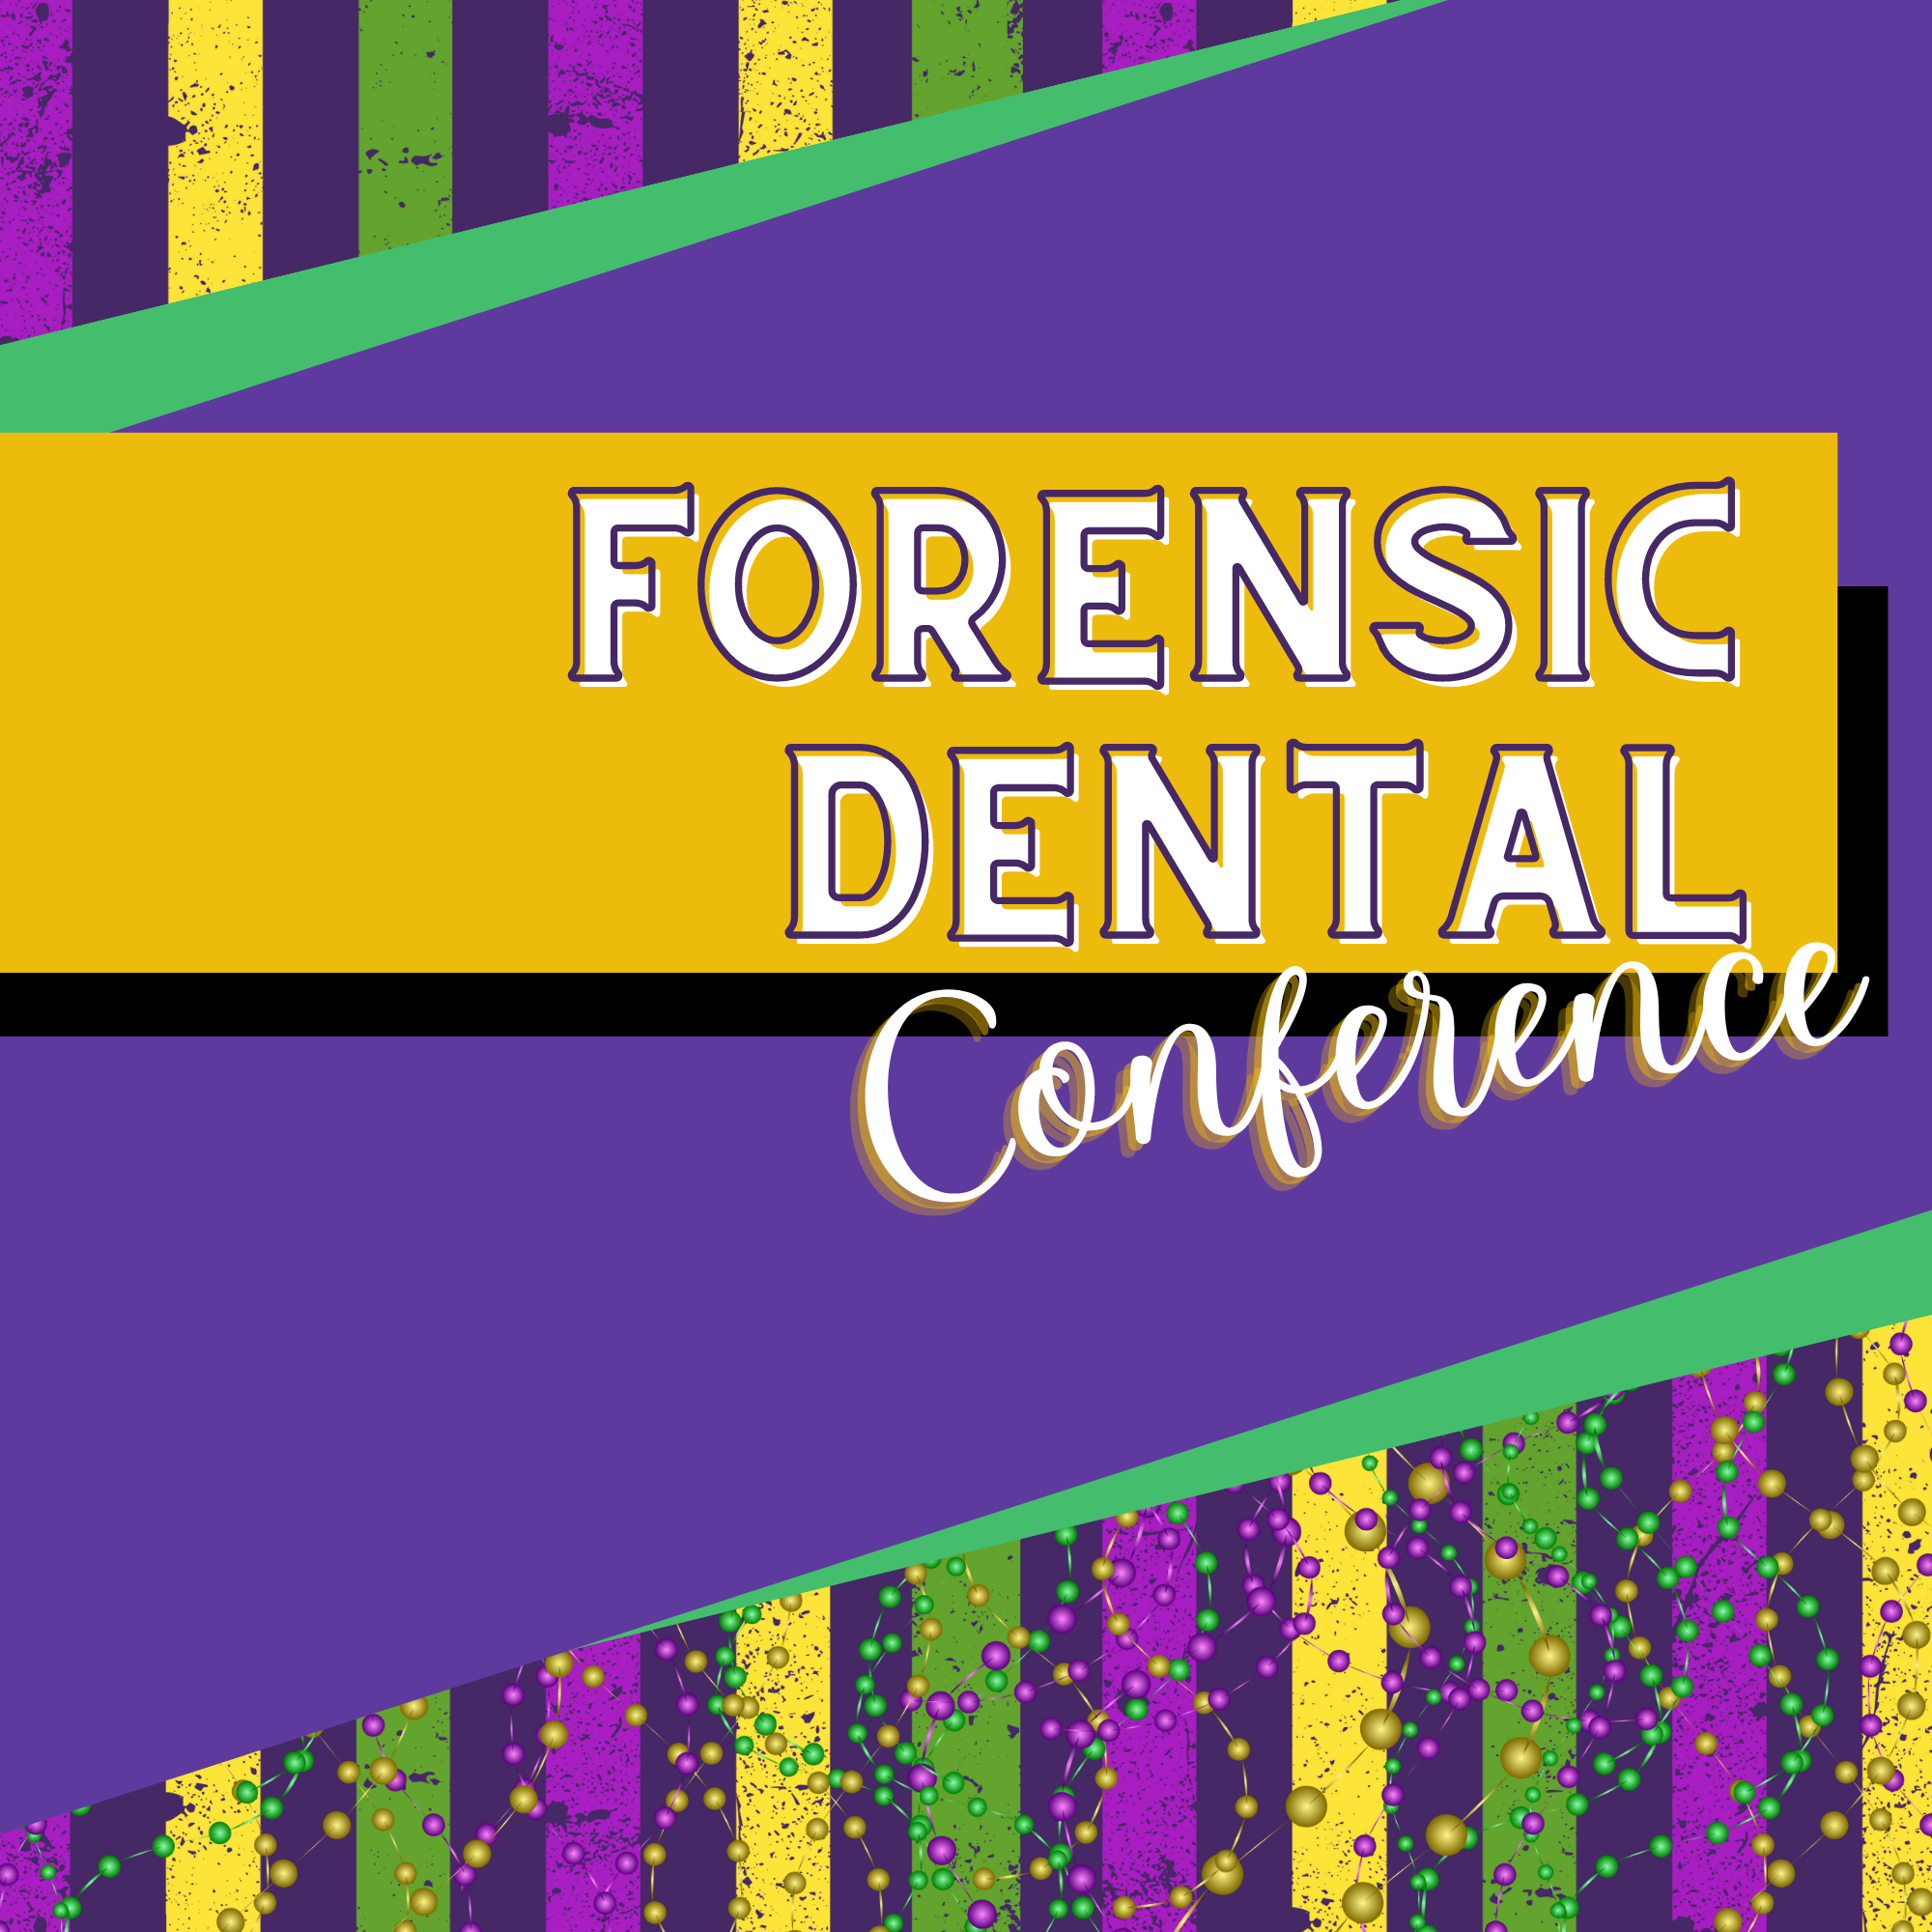 Eighth conference - The Forensic Dentistry | Learn from noted professionals hosted by JAN GORNIAK